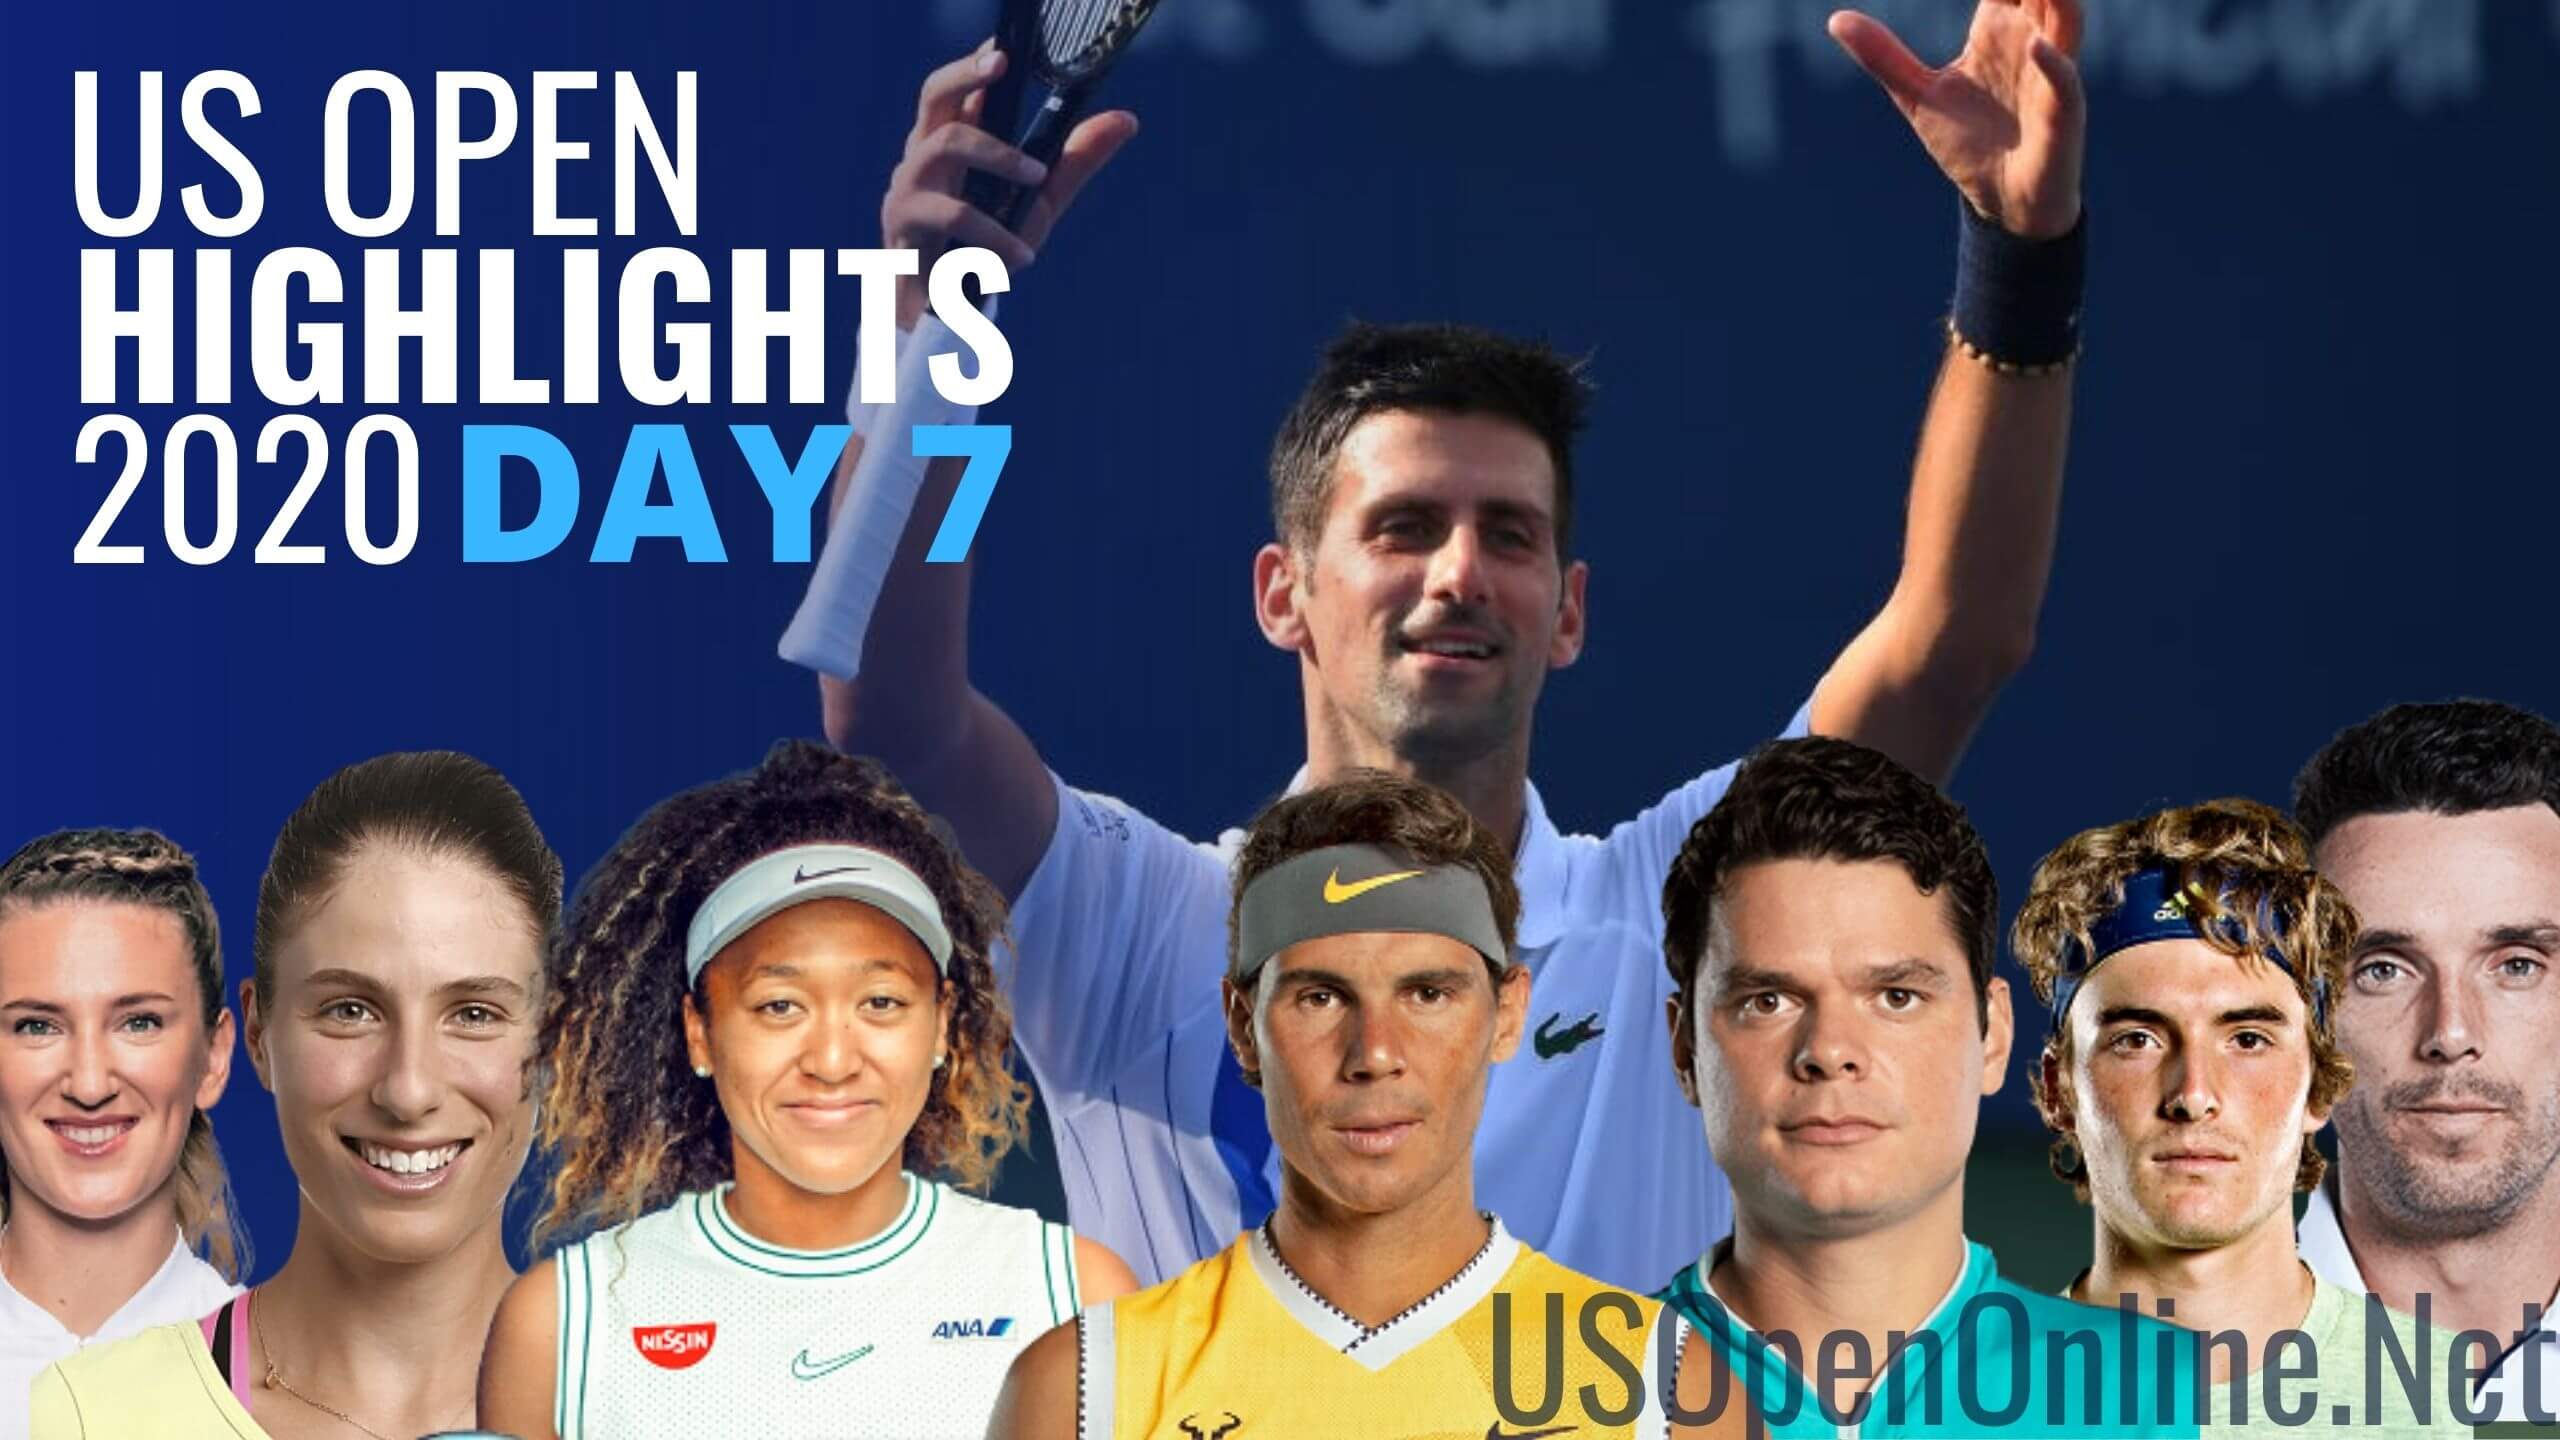 US Open Tennis 2020 Day 7 Complete Match Highlights